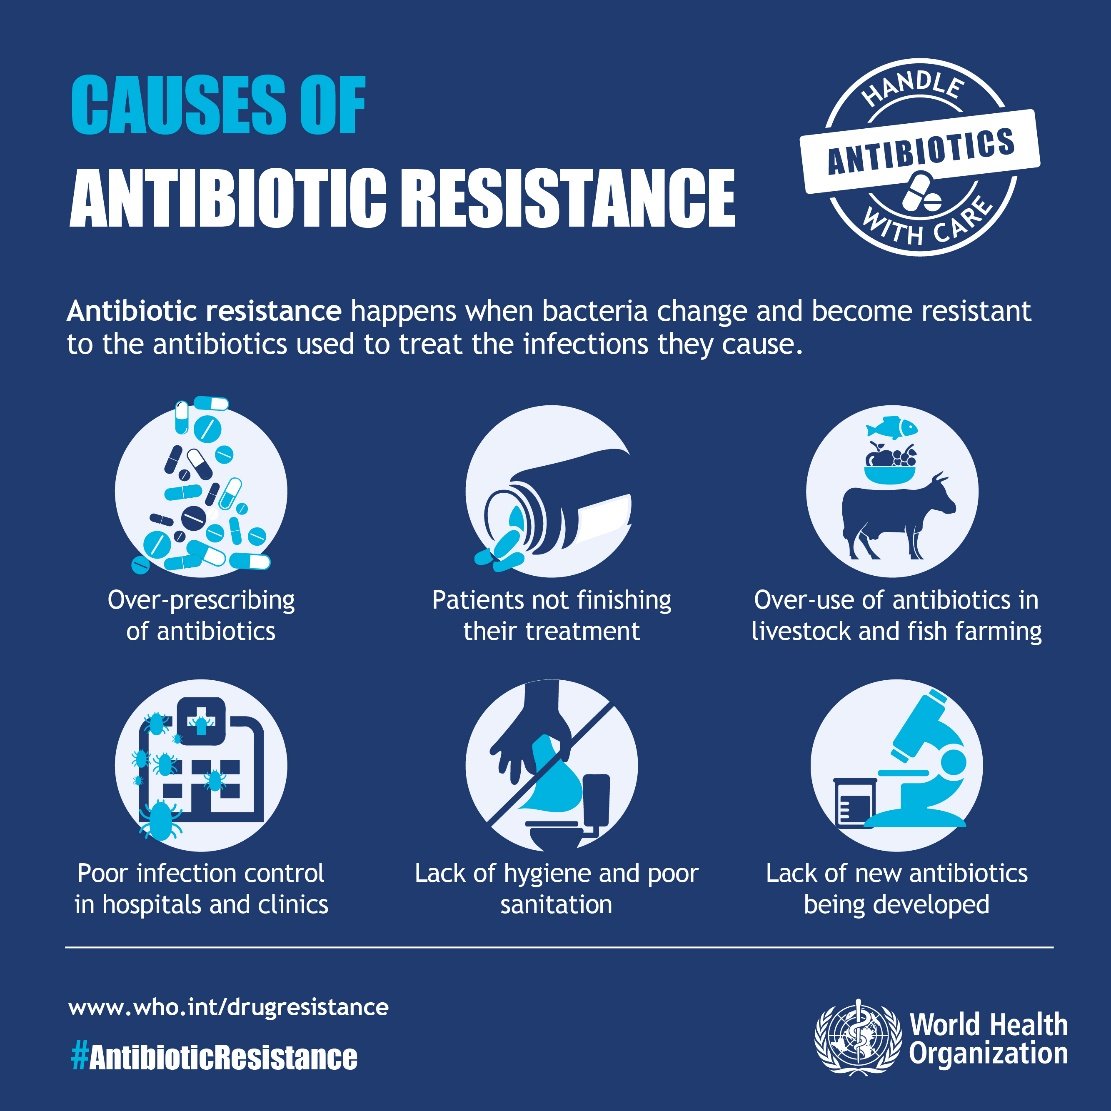 Antimicrobial Resistance (AMR)